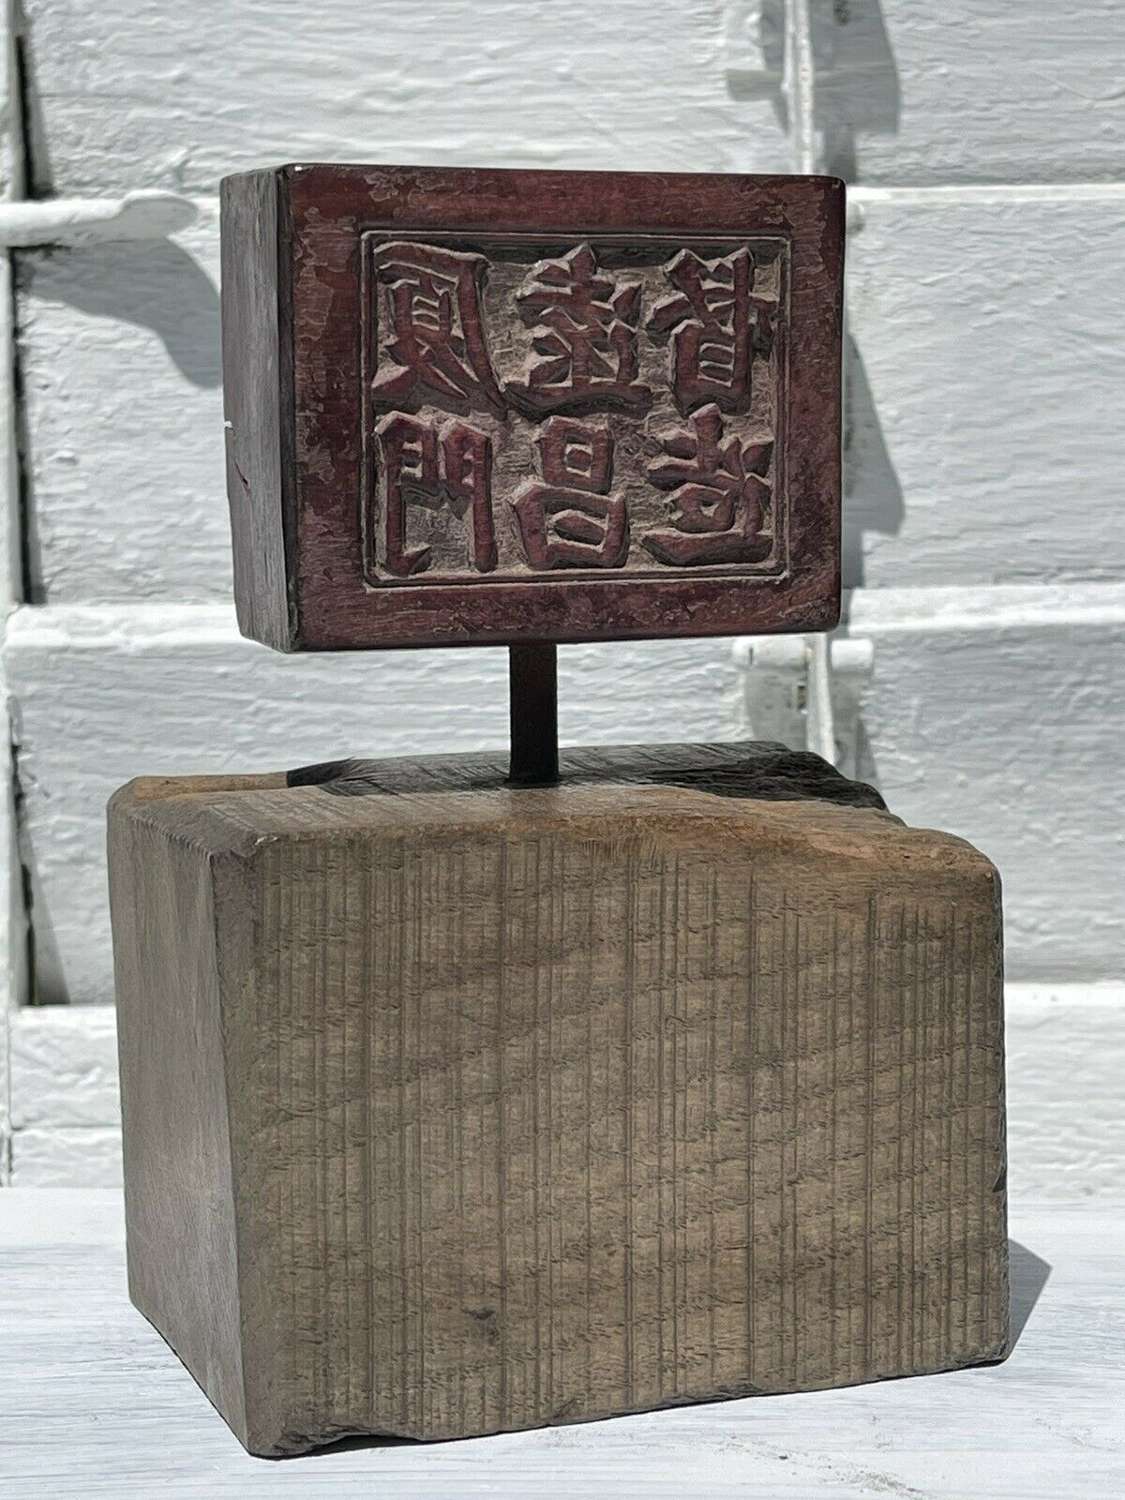 Chinese wooden seal